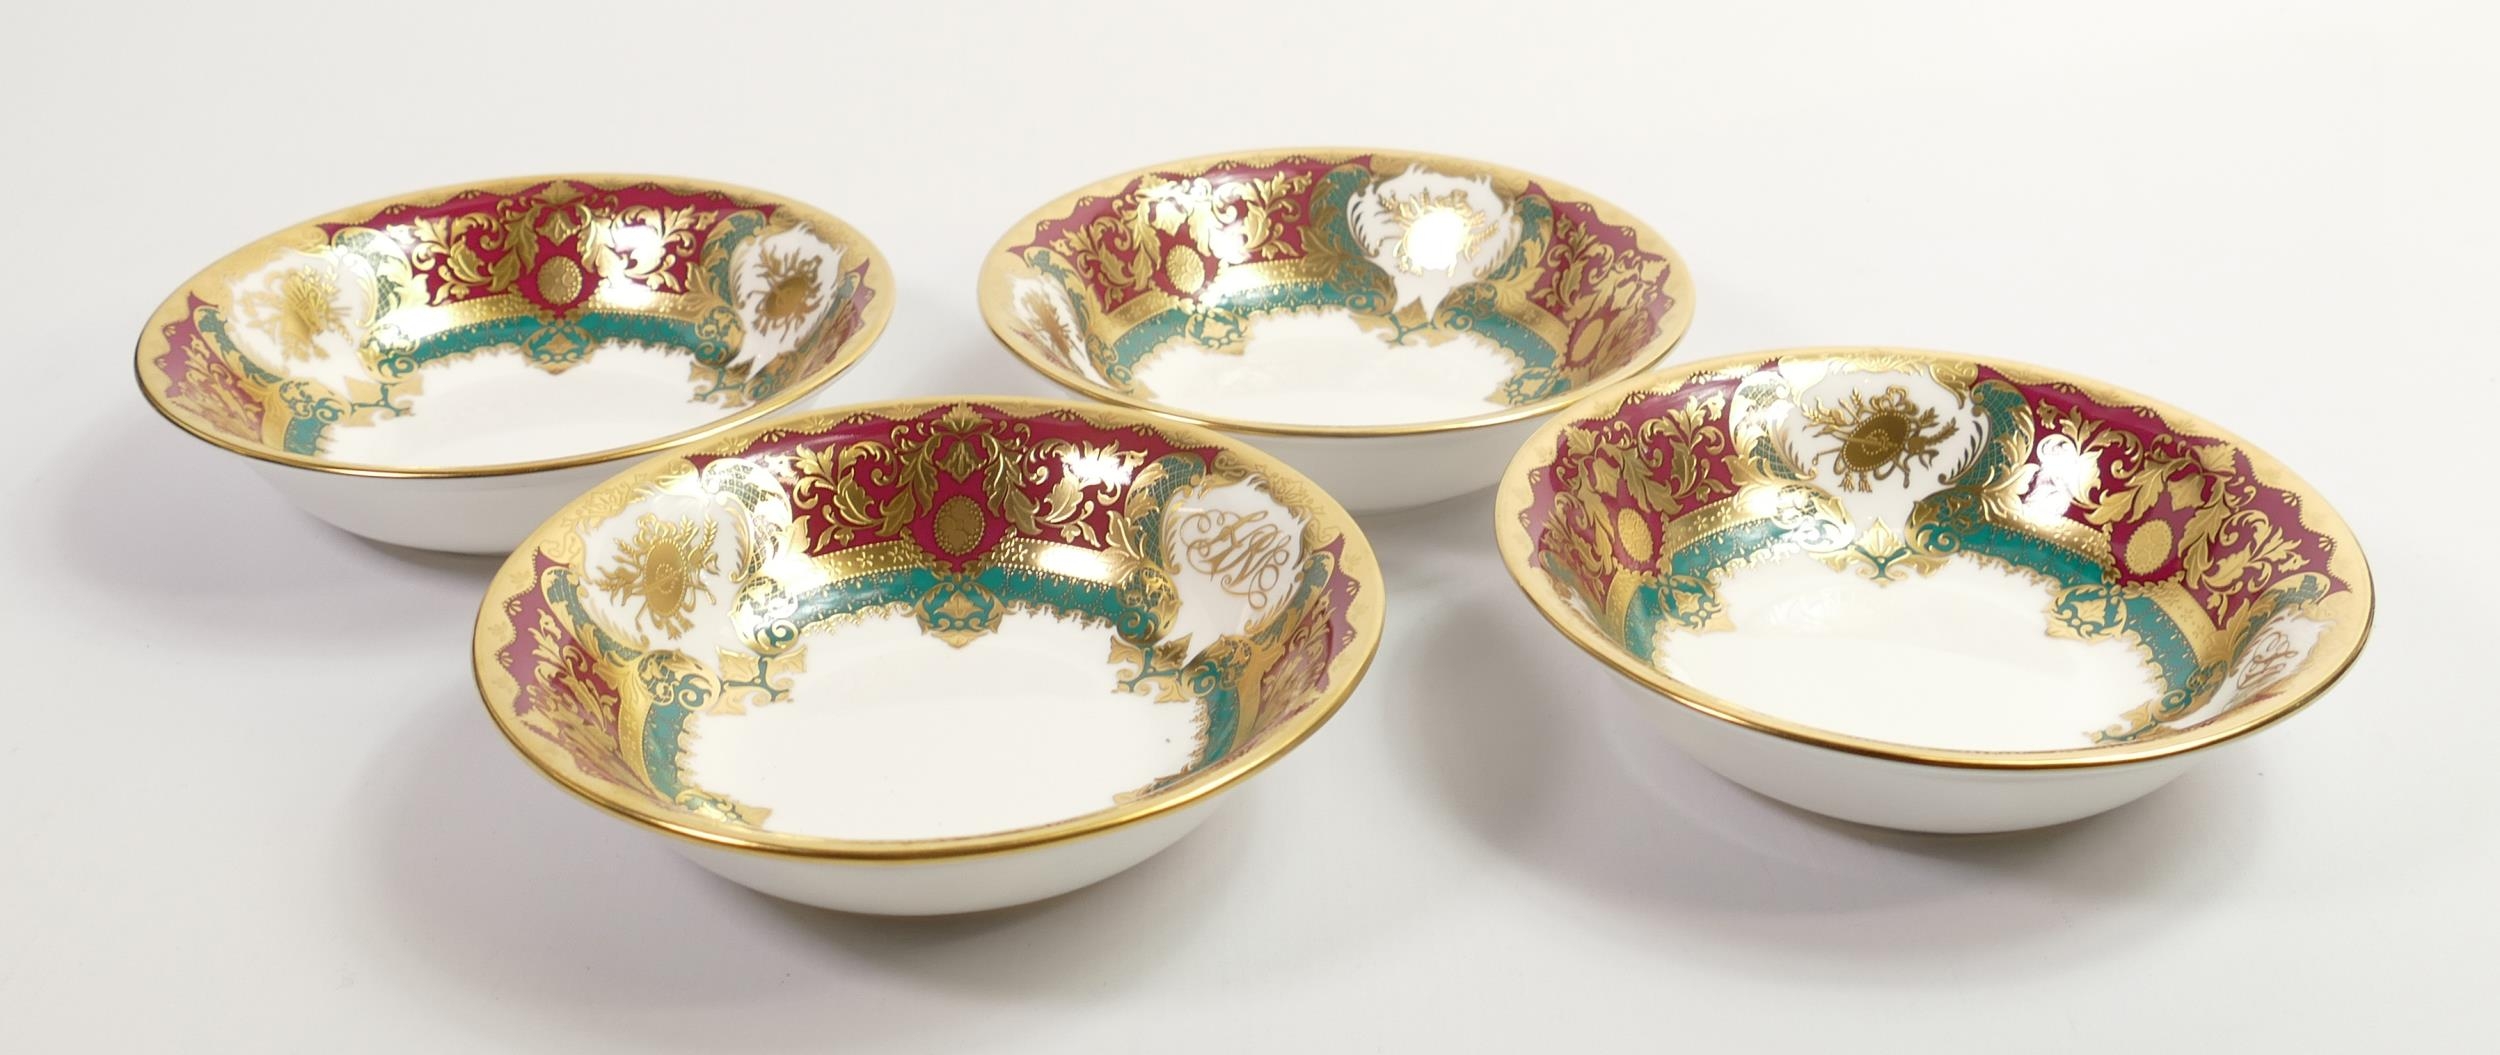 De Lamerie Fine Bone China heavily gilded Andrew Winch Designs patterned Bowls for Al Mirqab,